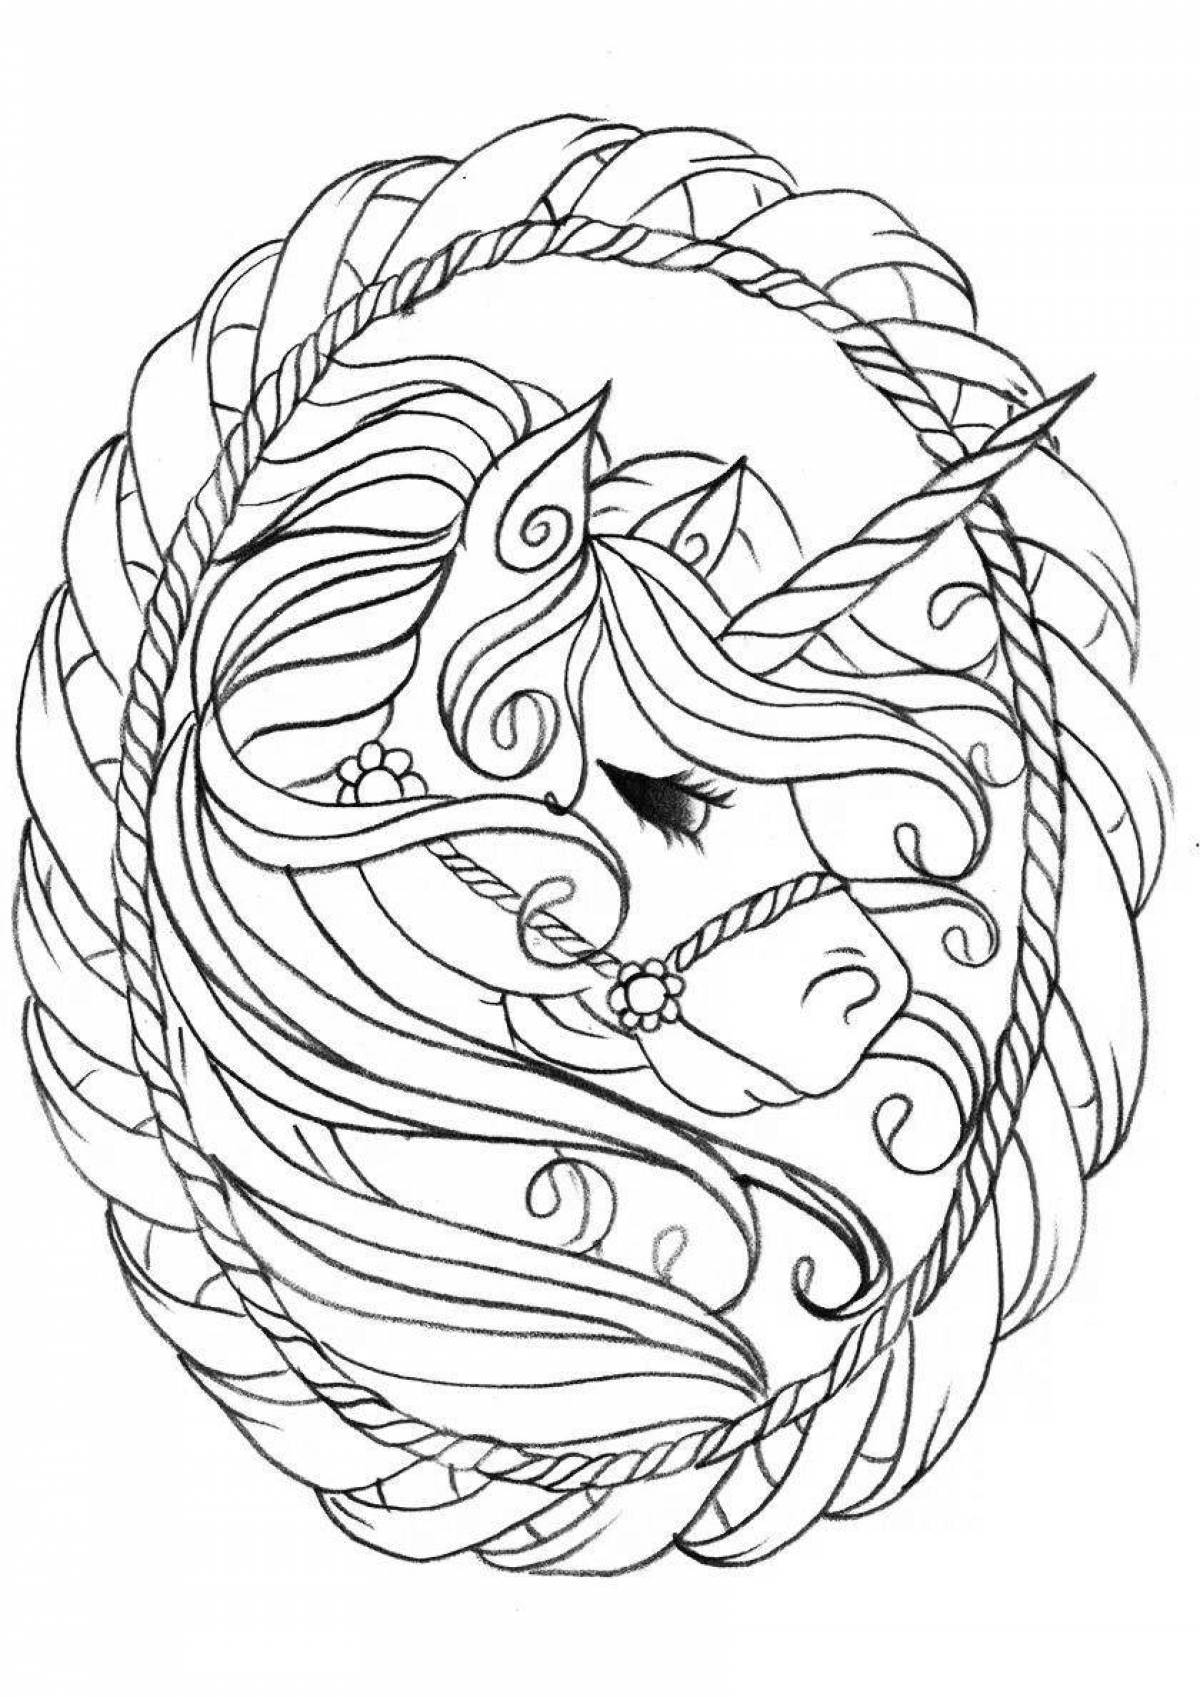 Dreamcore coloring page - tempting